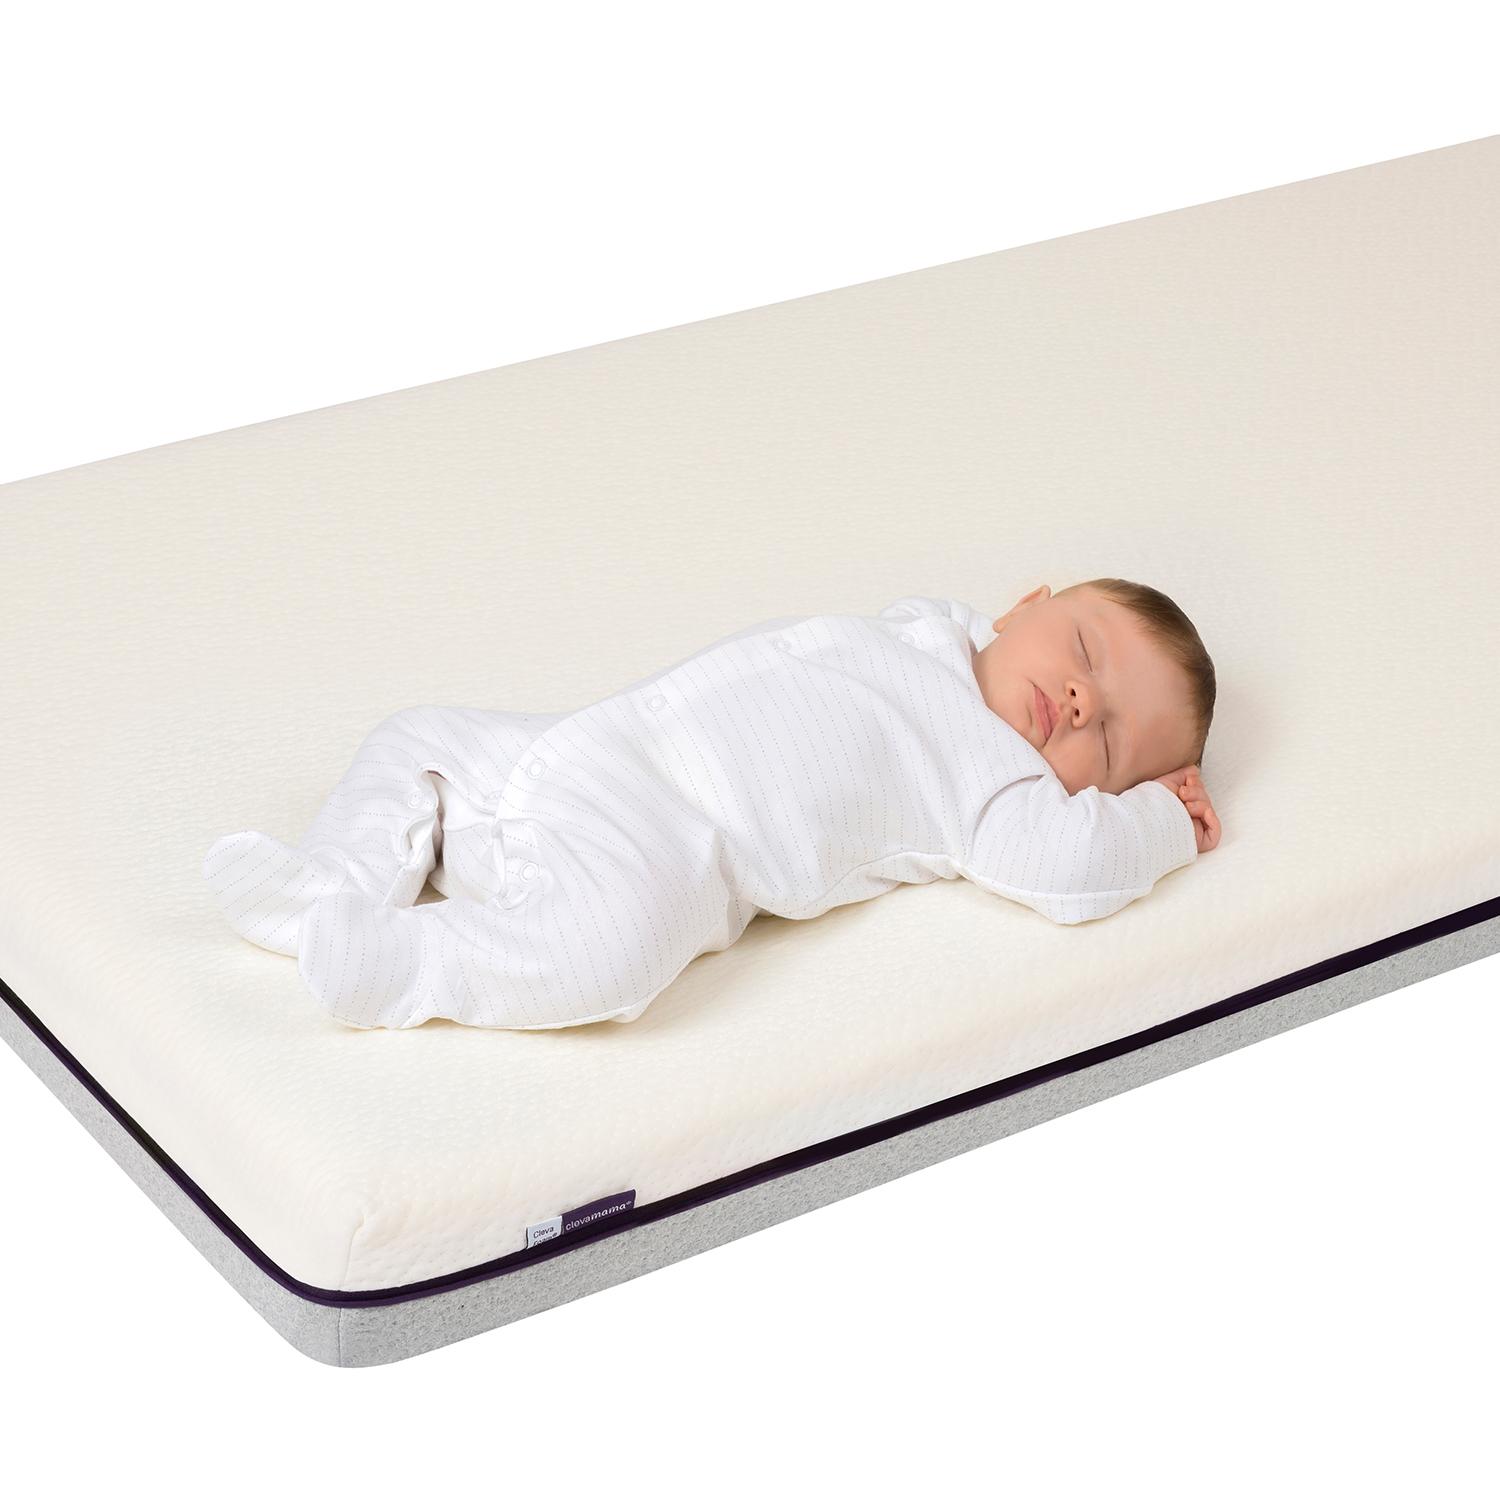 Clevamama 3114 Cotbed support mattress